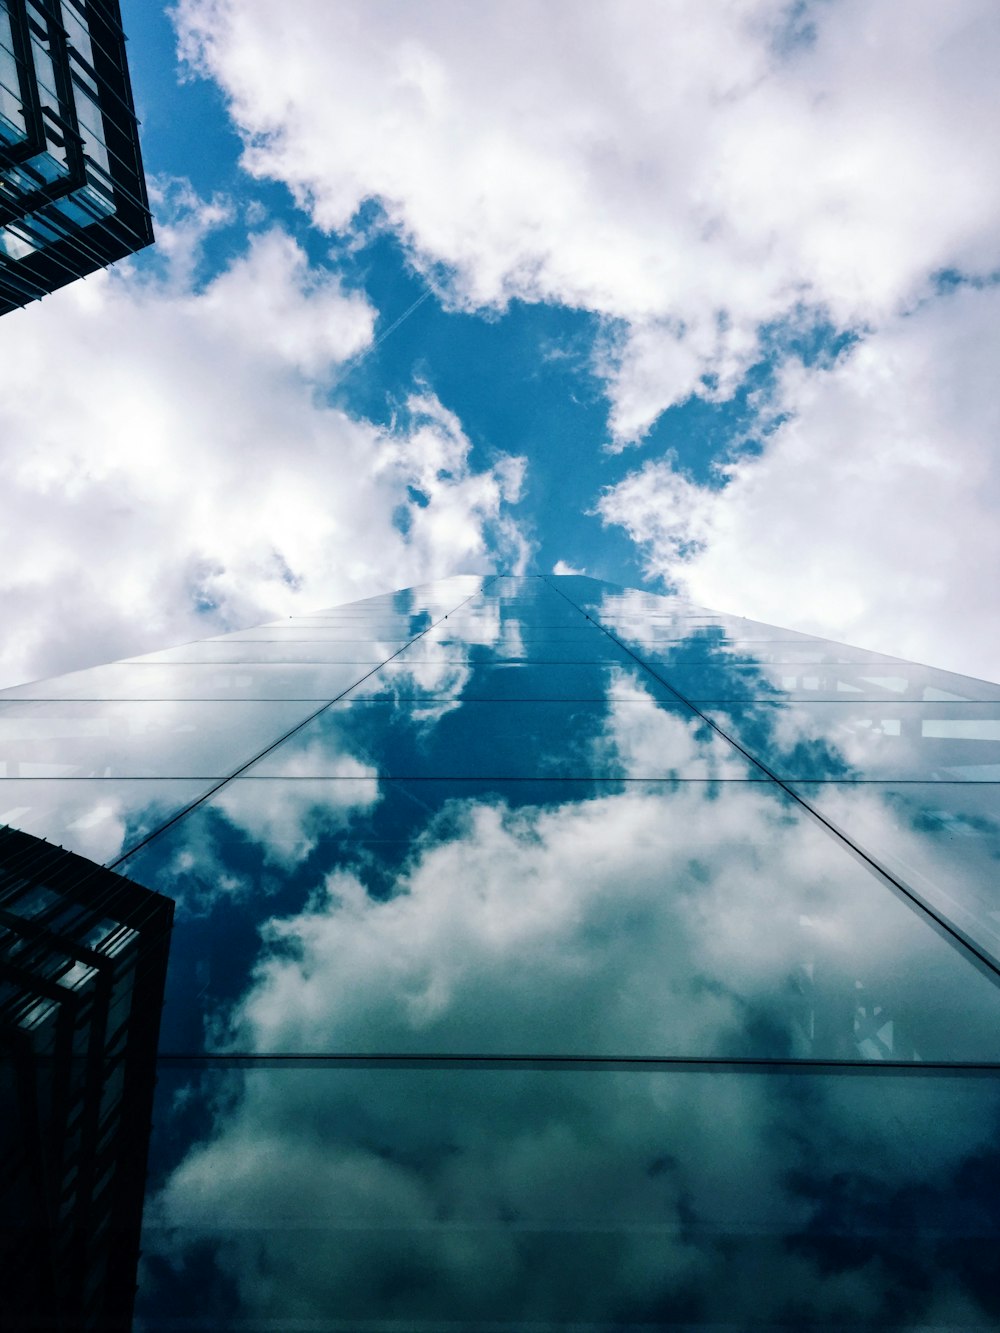 worm's-eye view of glass building across white clouds